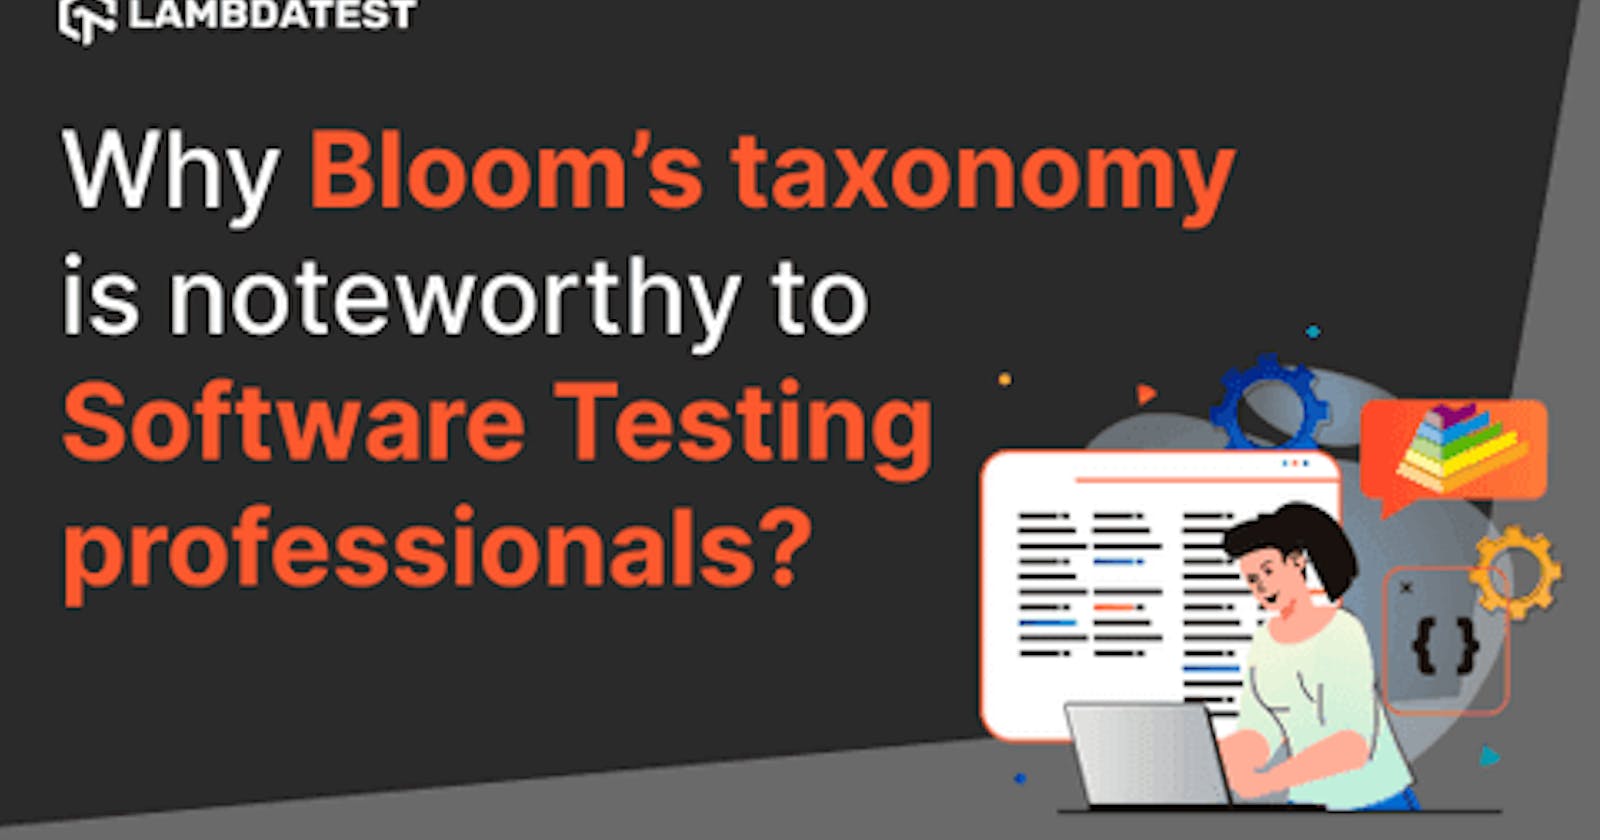 Why Bloom’s taxonomy is noteworthy to Software Testing professionals?